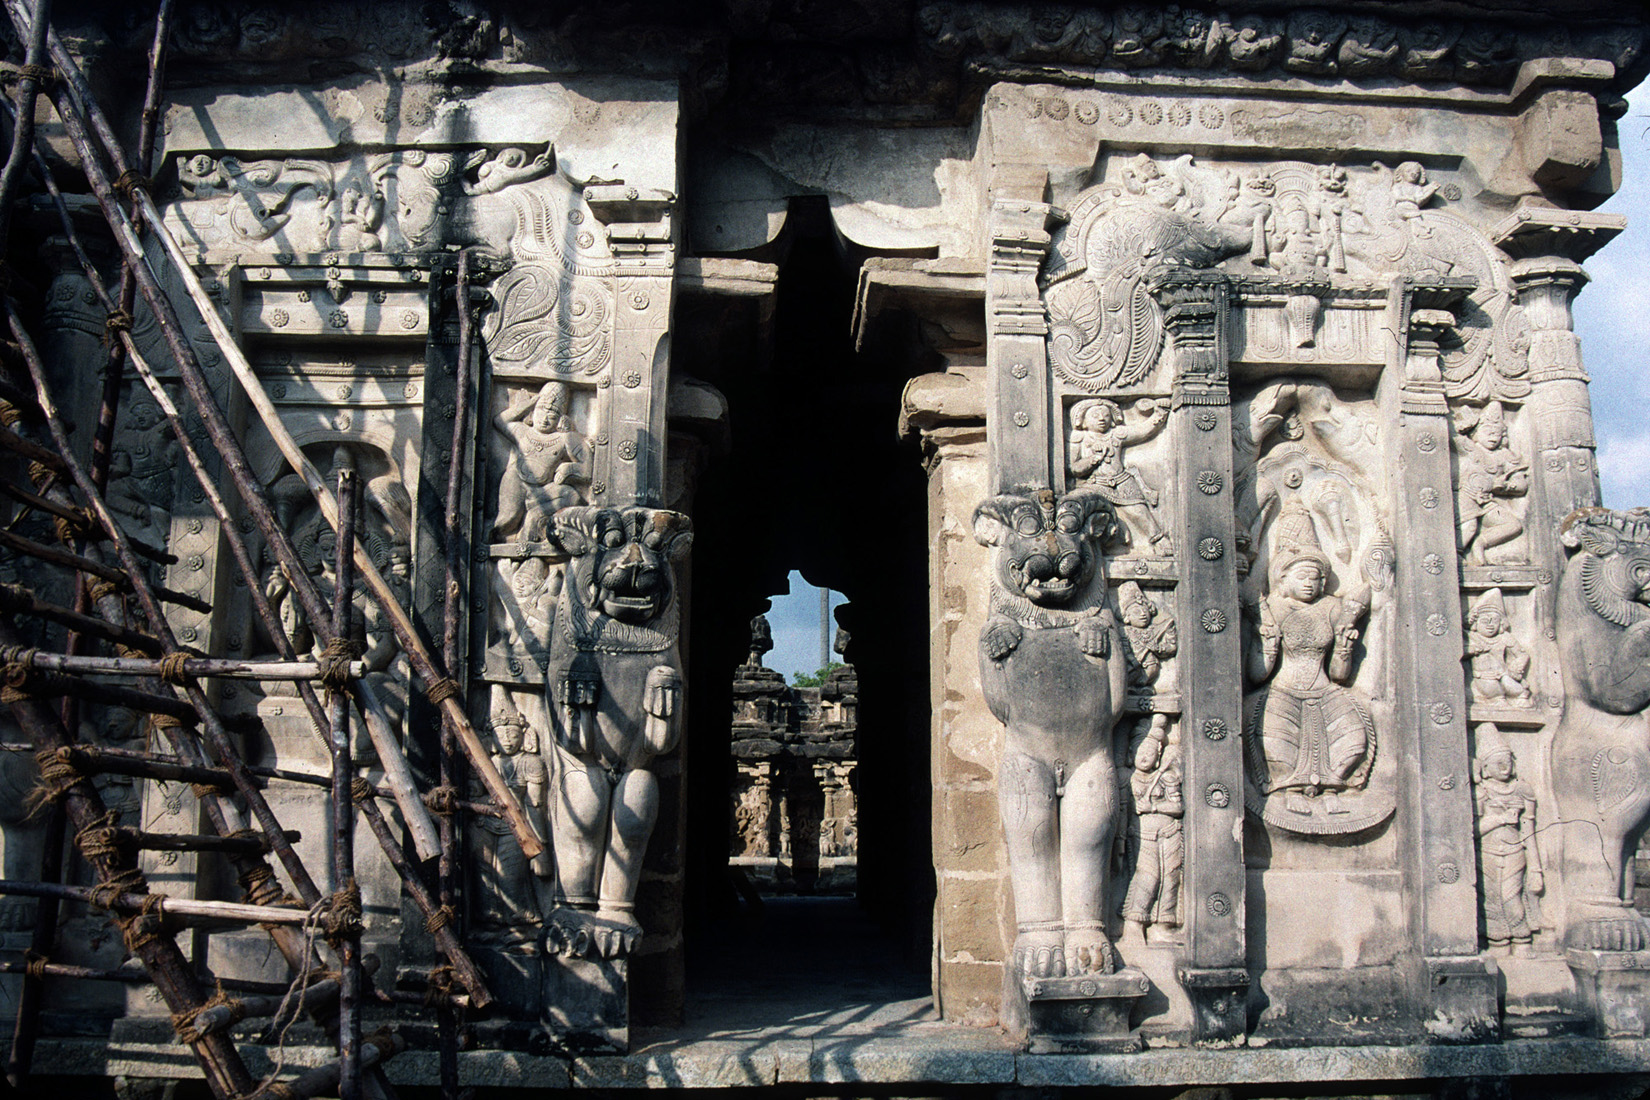 Same, Same, but Different: Present and Past at a Hindu Temple